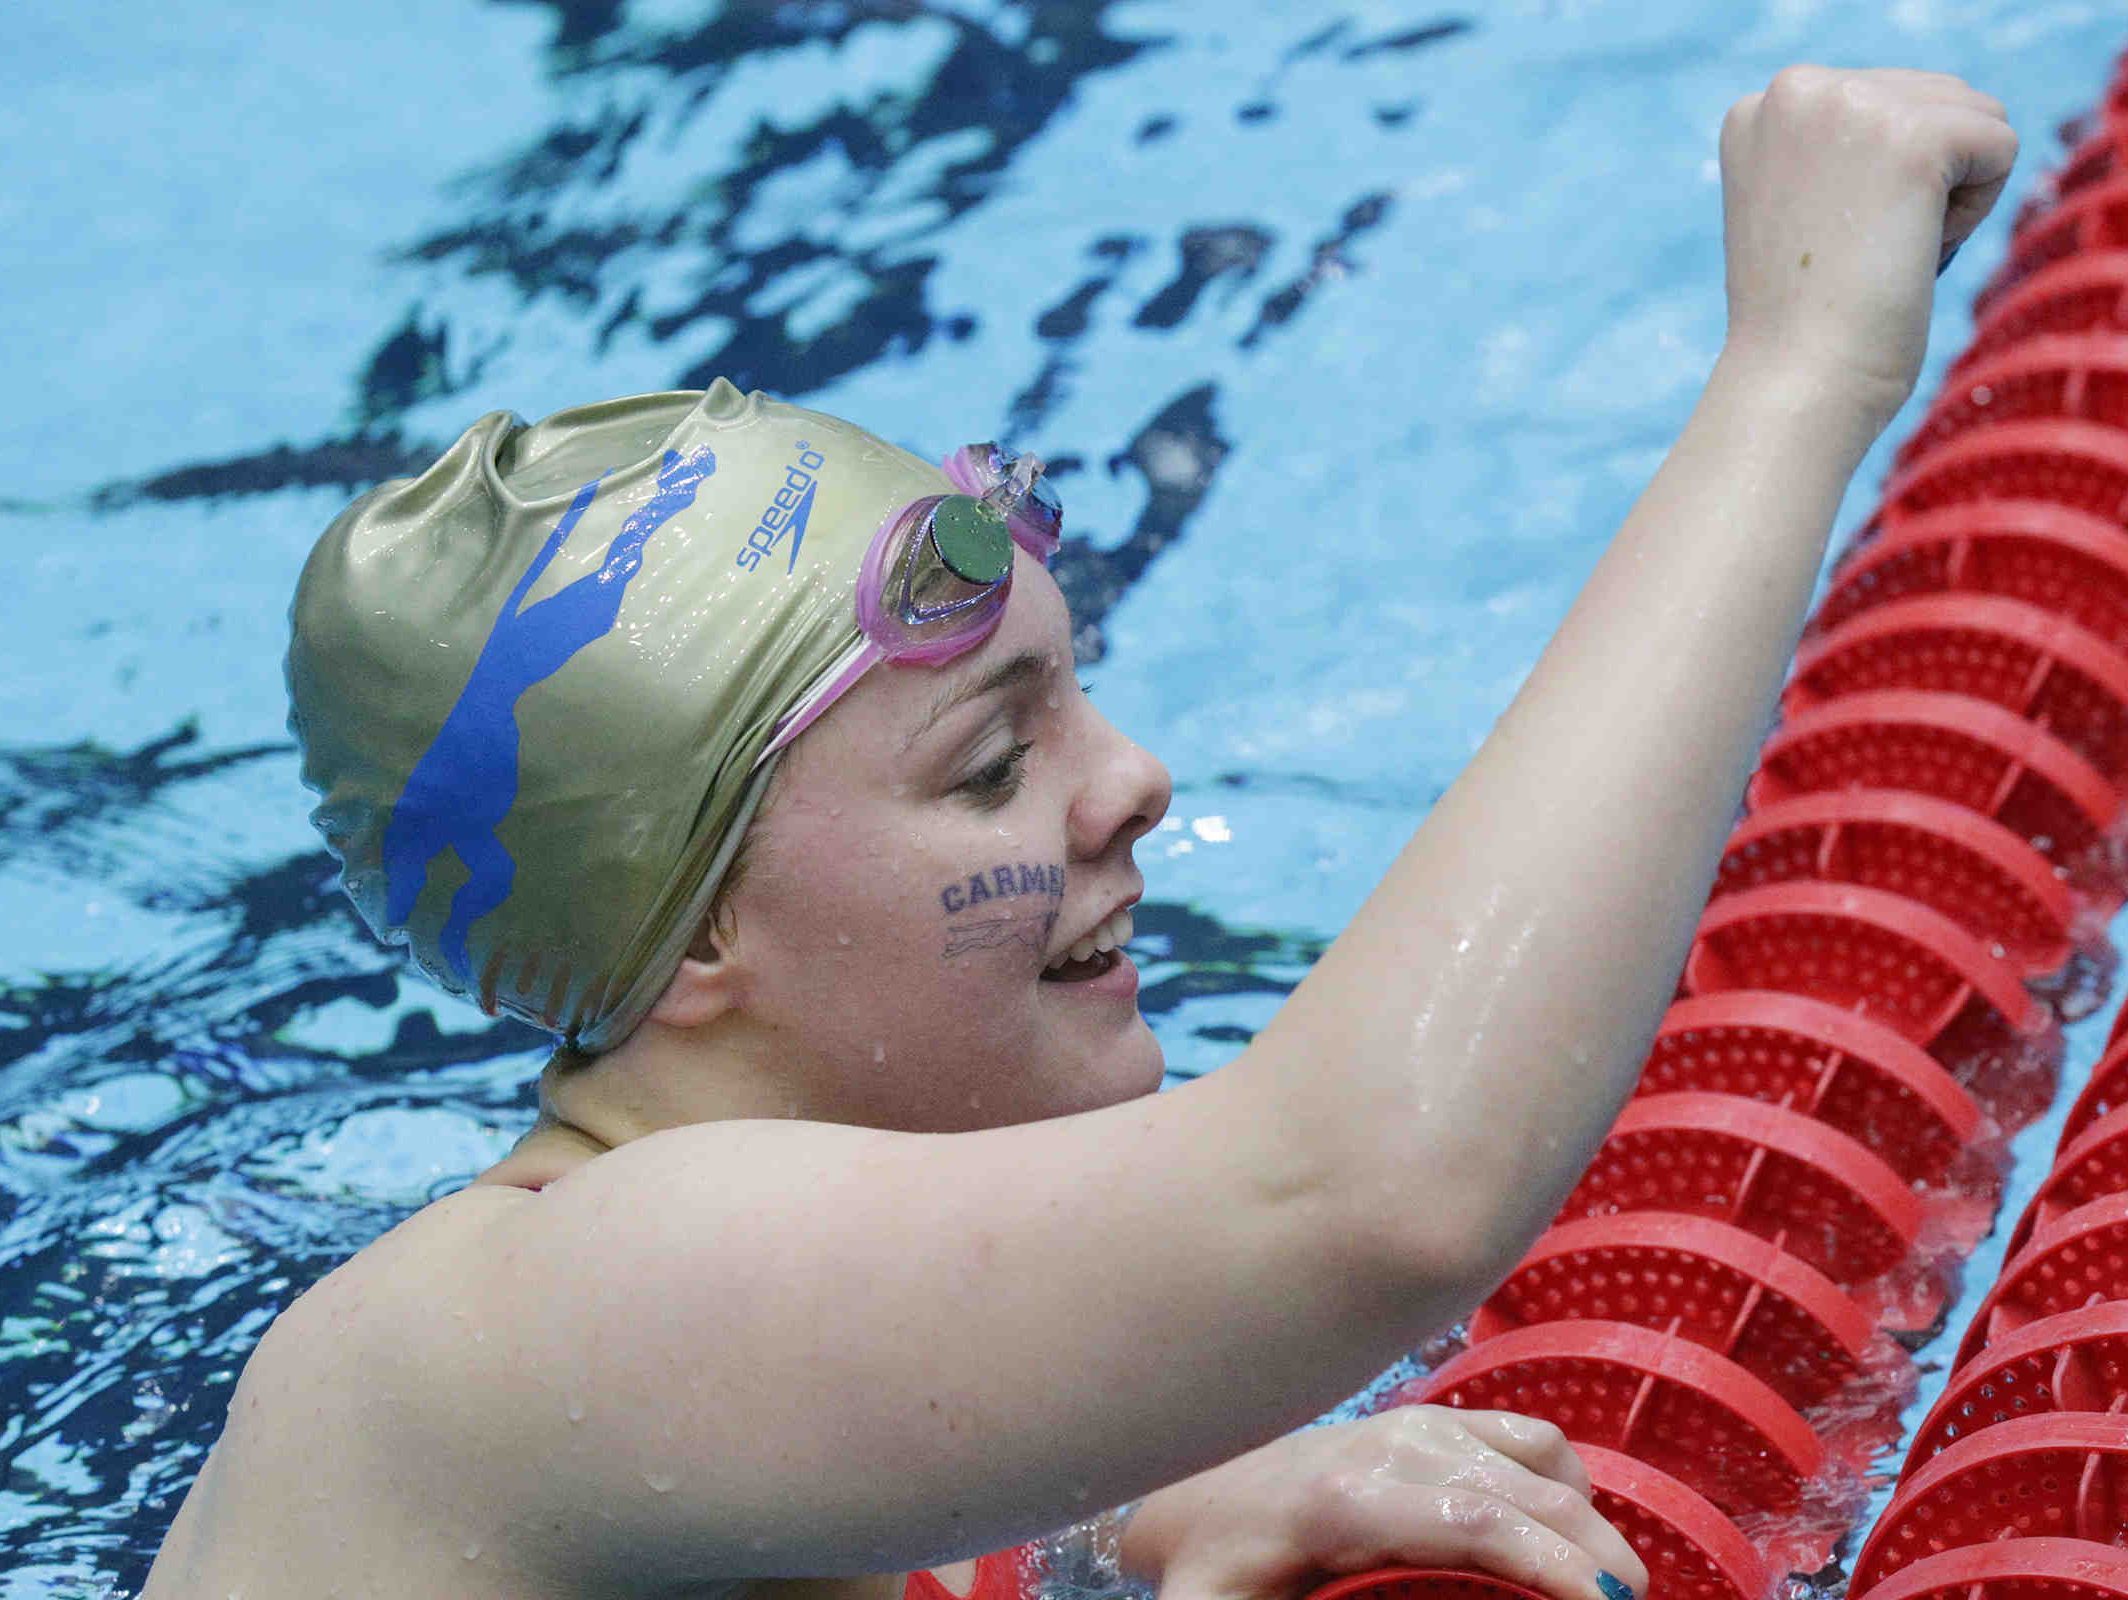 Carmel's Sammie Burchill raises her fist after competing in the girls 100 yard backstroke, during the IHSAA girls swimming state finals, held at IUPUI Natatorium, Feb. 11, 2017.